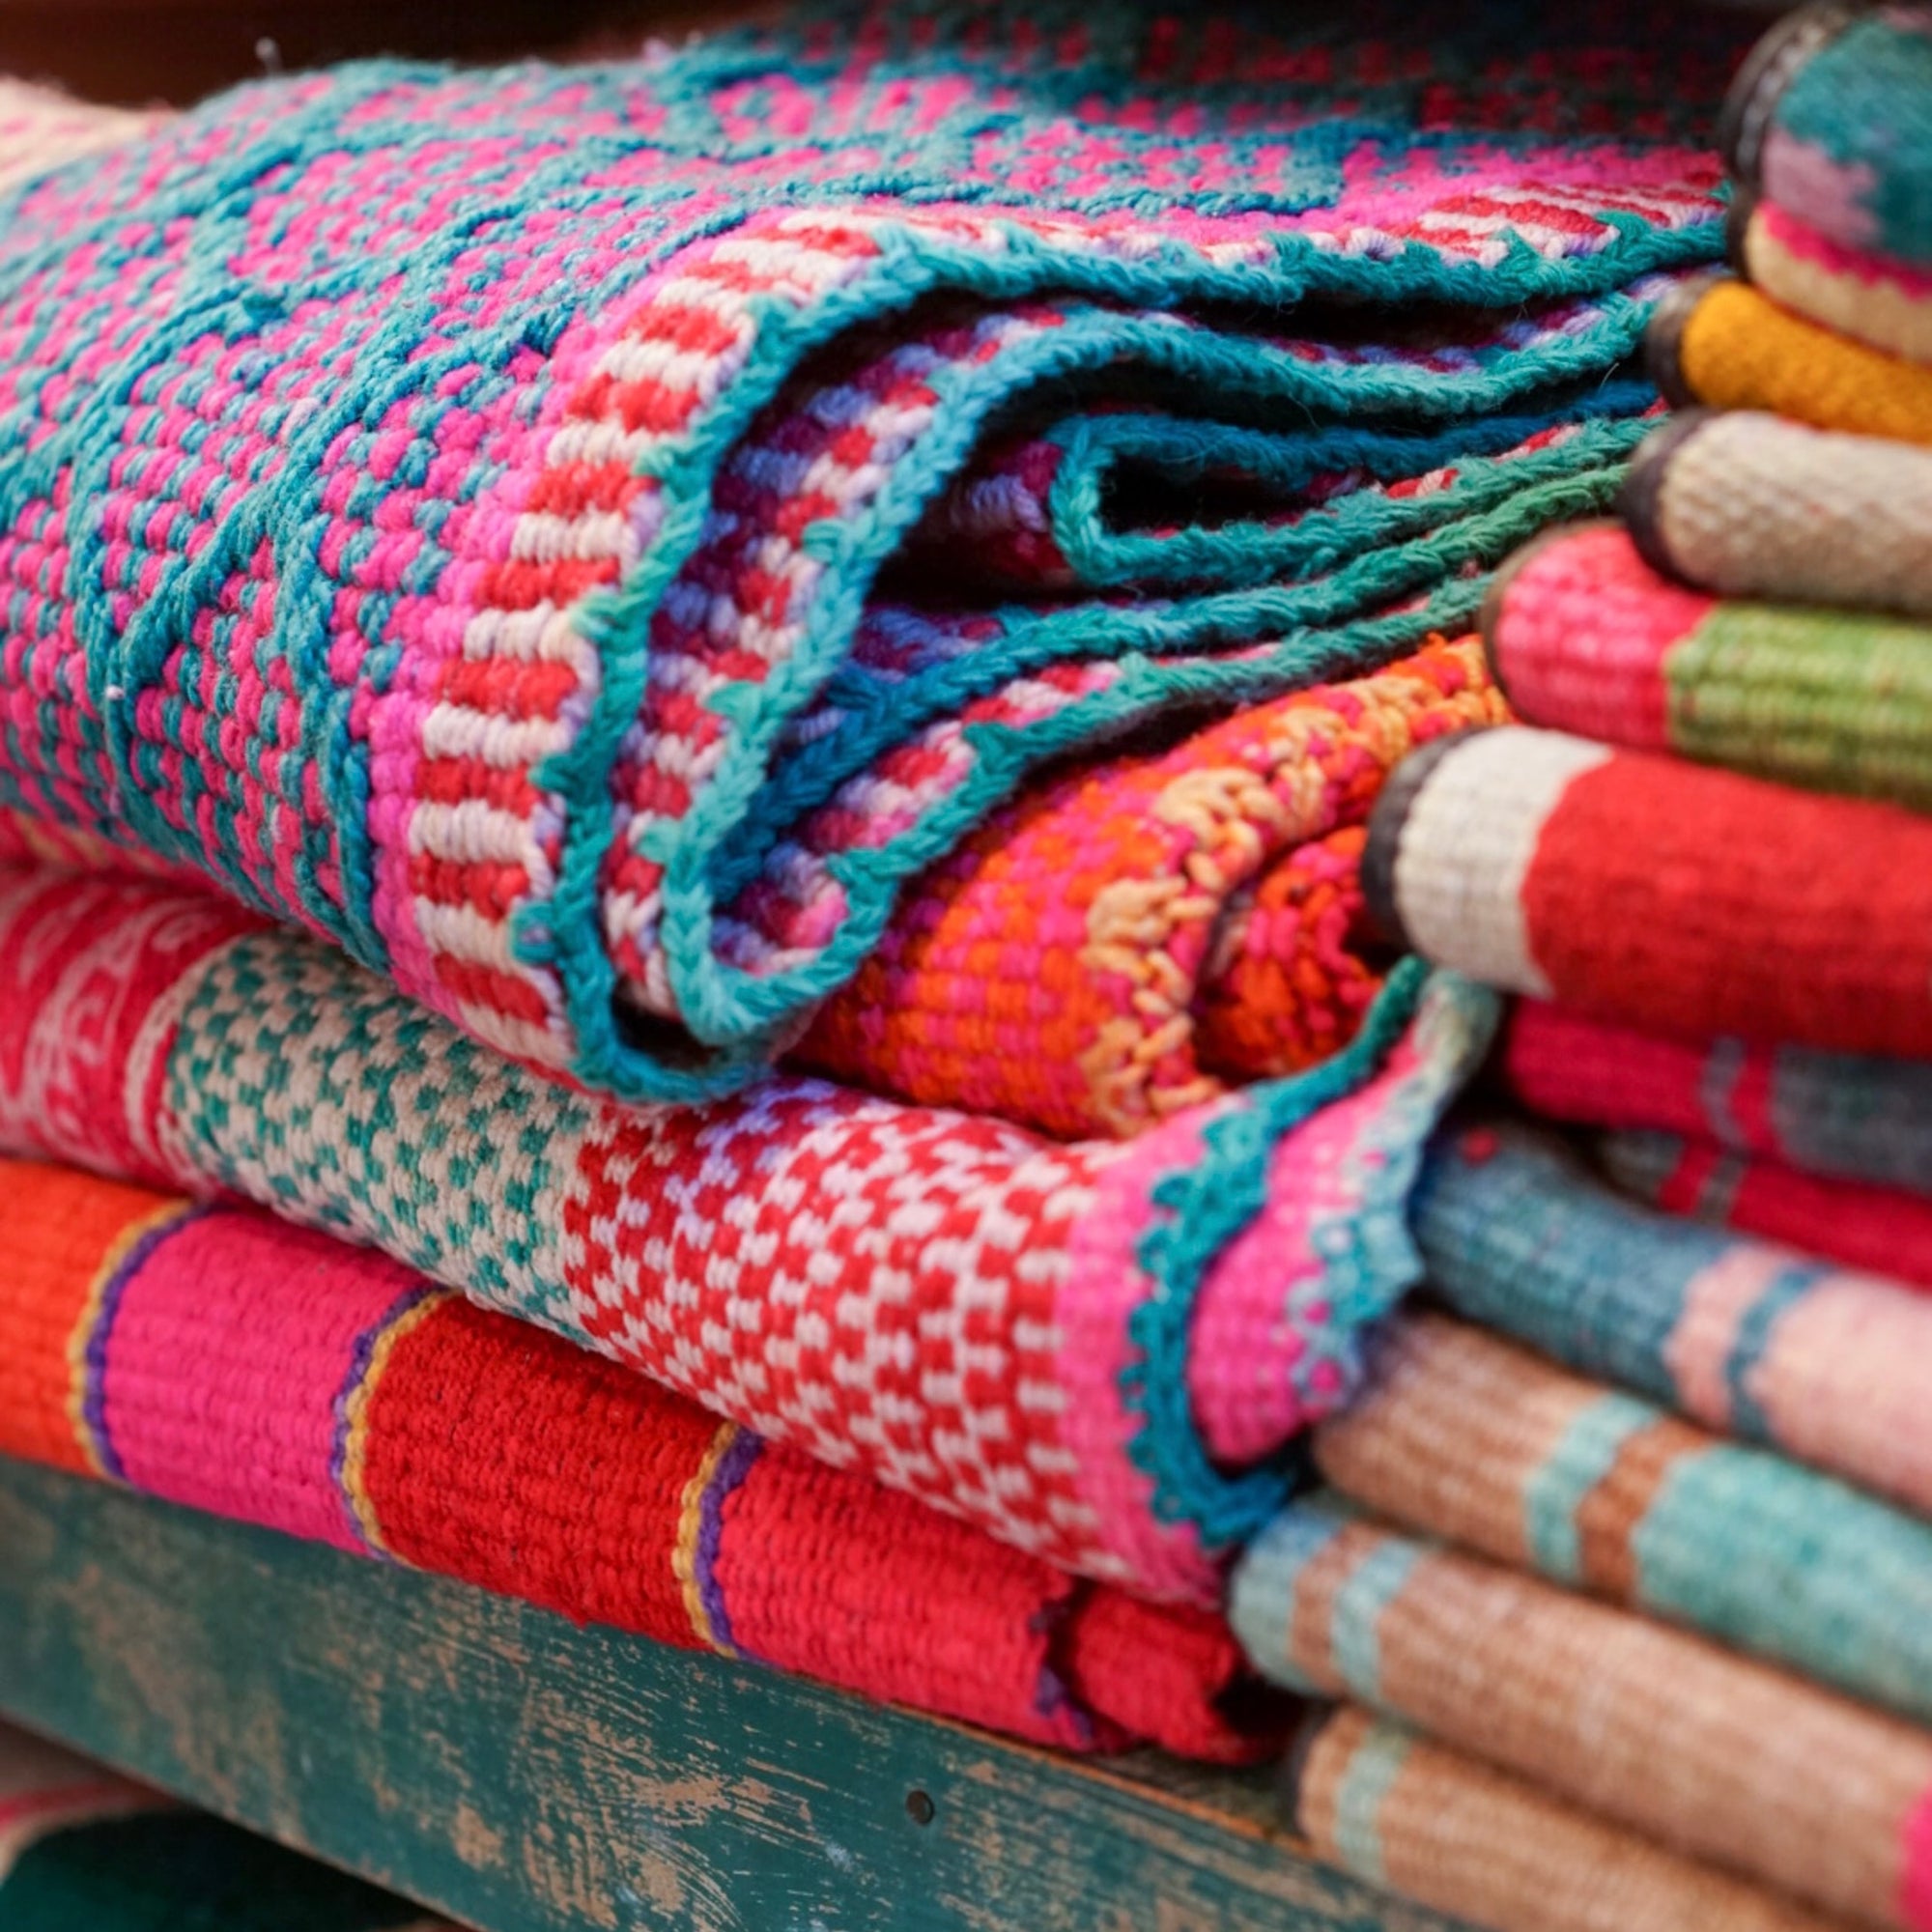 Cleaning Kilims: How to Wash Kilim Rugs?